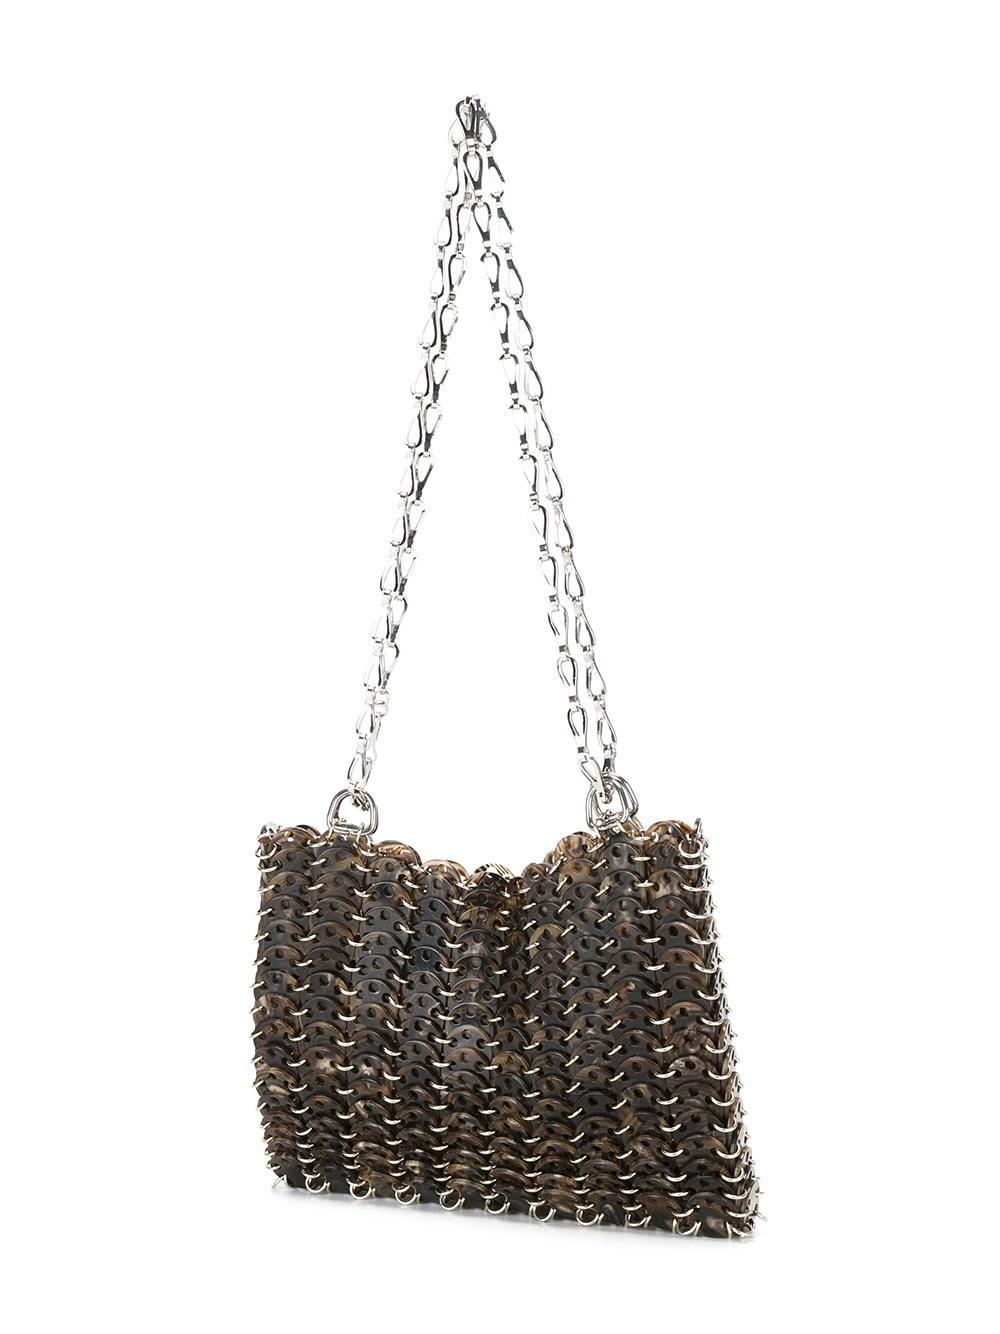 In Paco Rabanne's iconic chainmail finish, this shoulder bag is a textural play of plastic discs threaded with metal rivets. The discs are finished in a marbled brown for a tortoise-shell effect. Its silk-lined interior is finished with a Paco